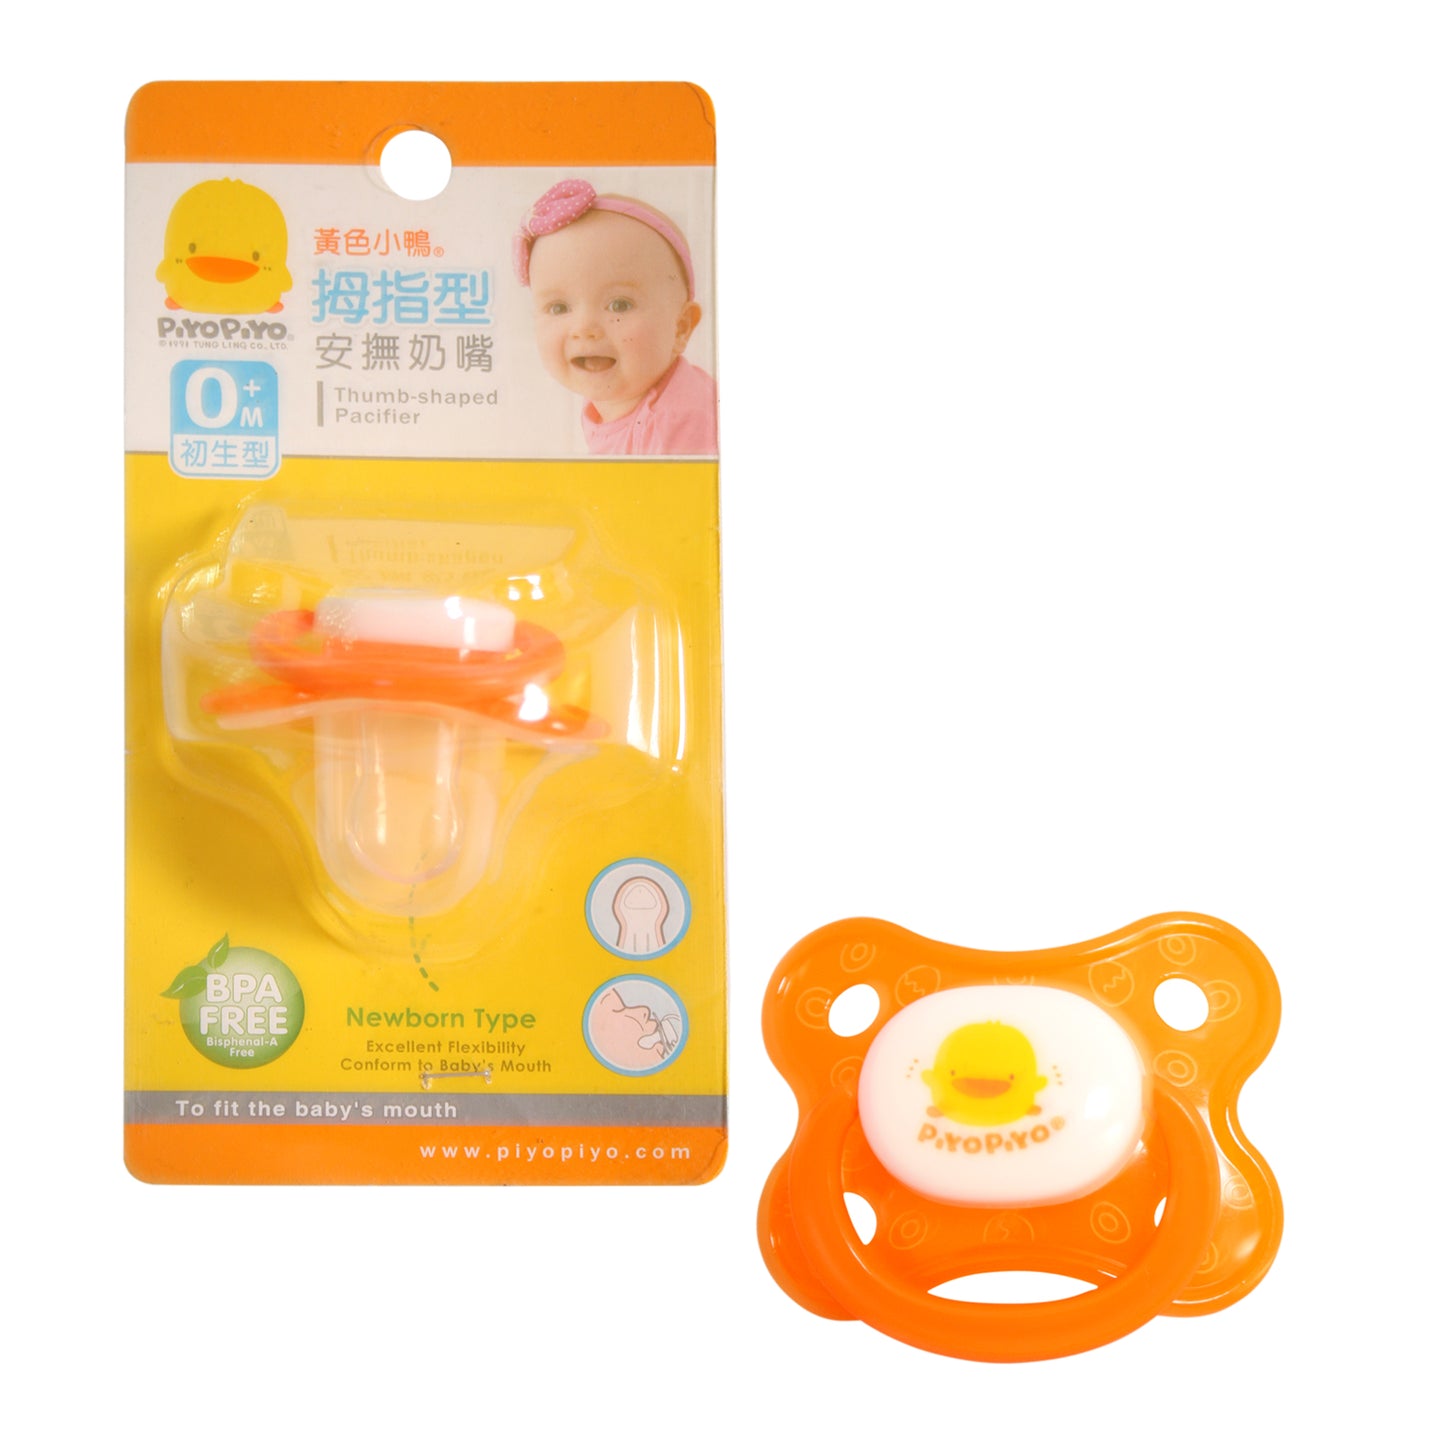 Thumb-Shaped Pacifier